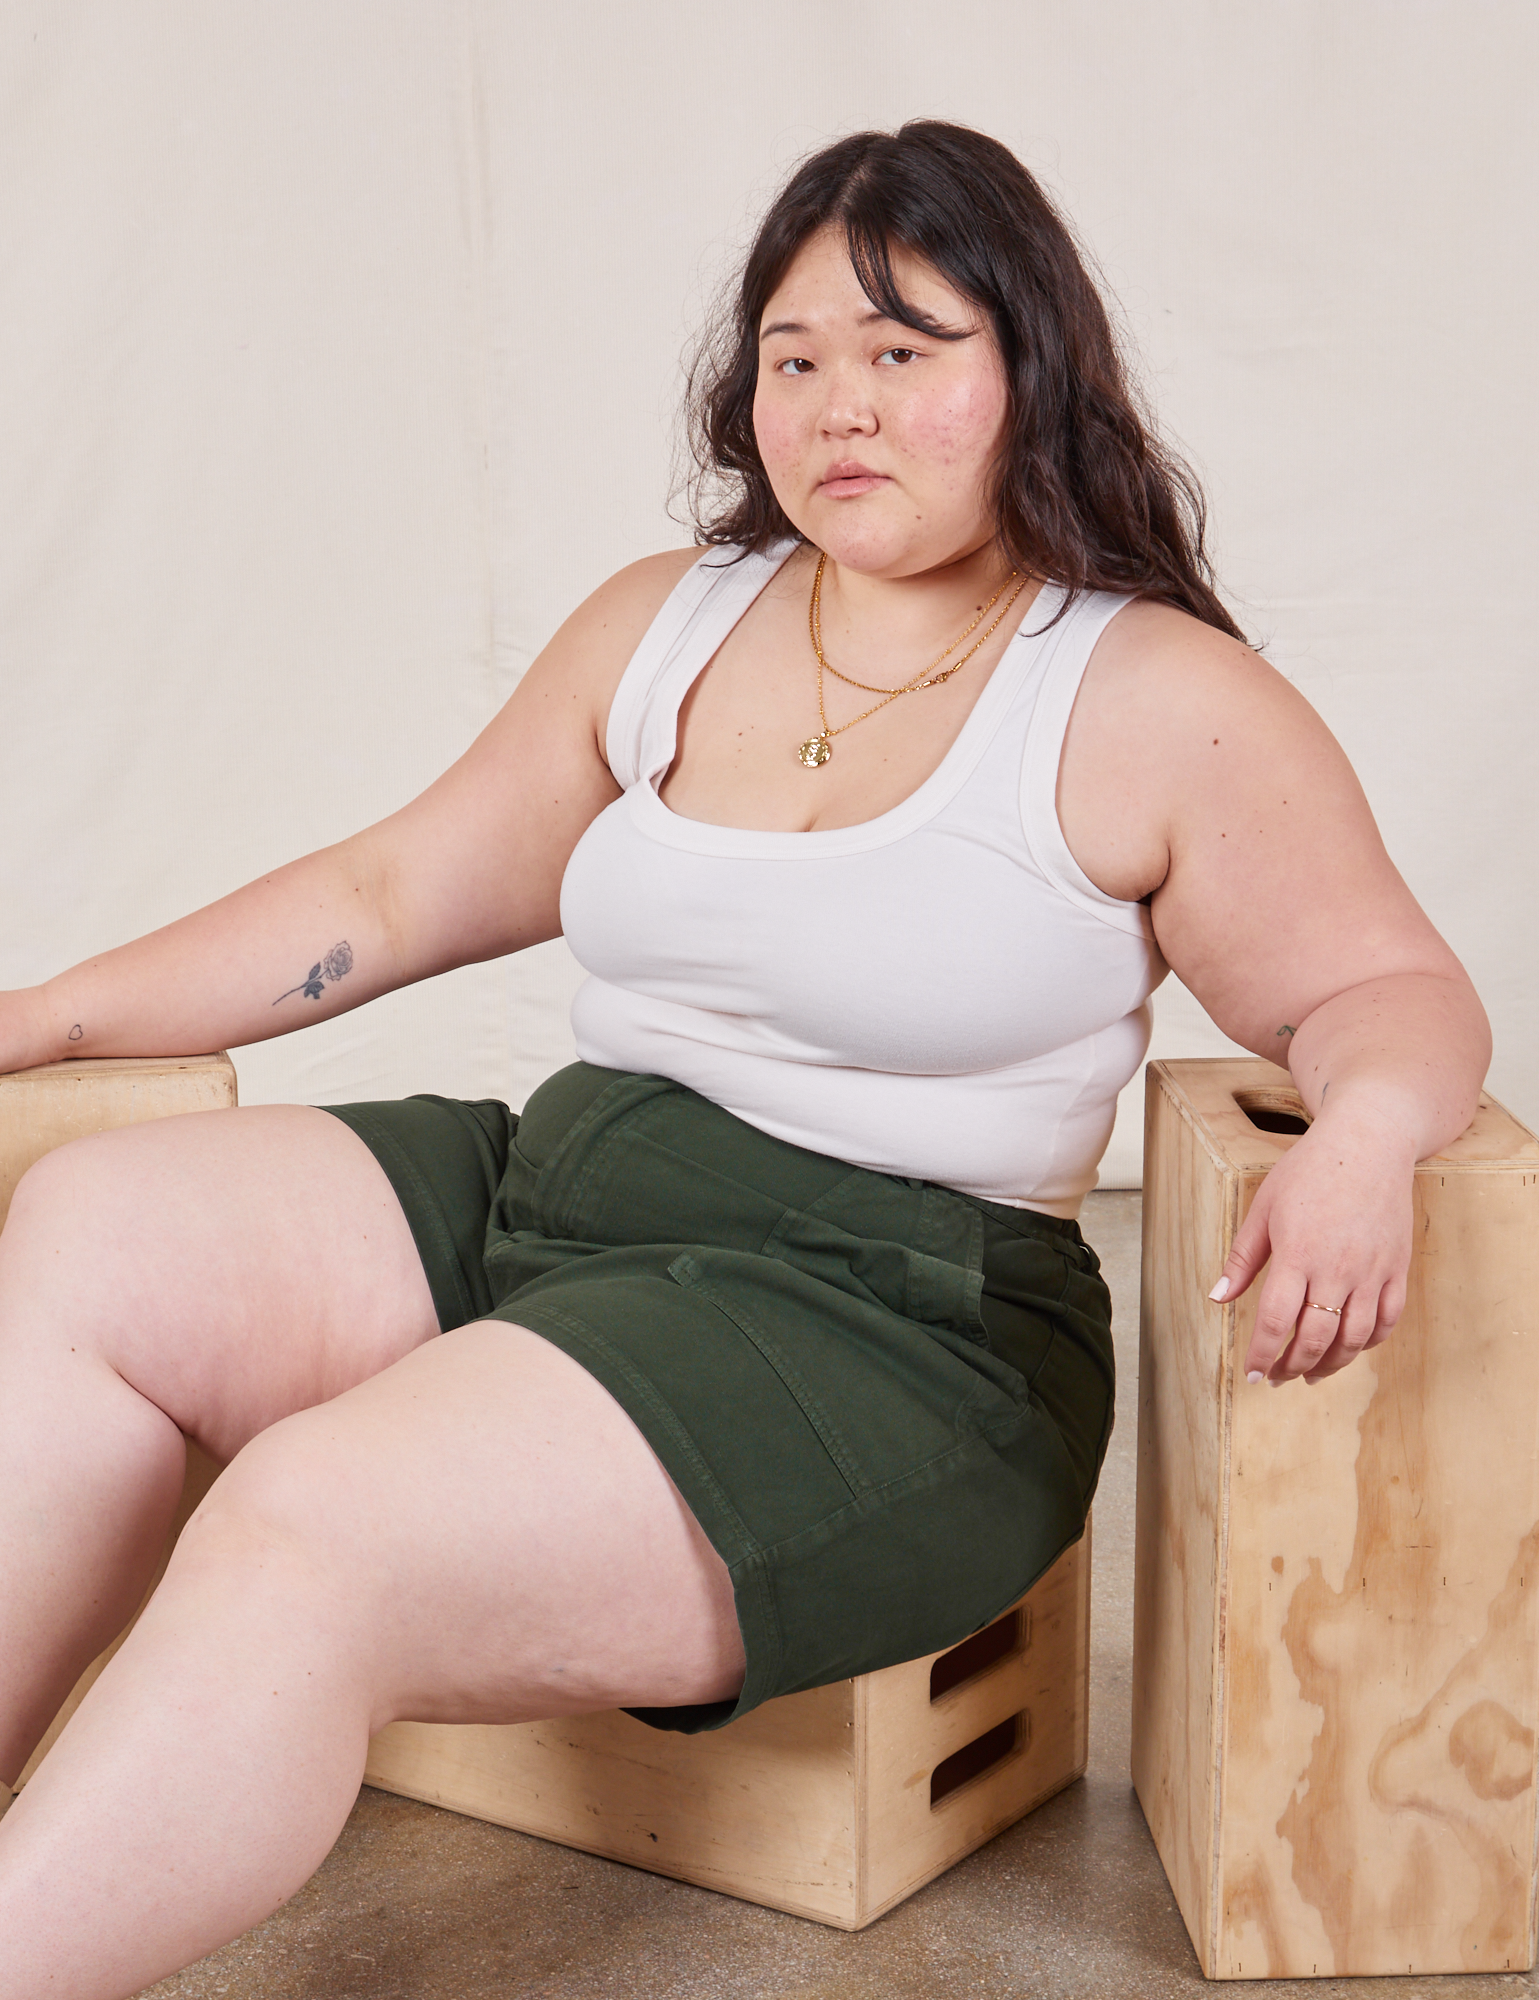 Ashley is wearing Classic Work Shorts in Swamp Green and a Cropped Tank Top in vintage tee off-white